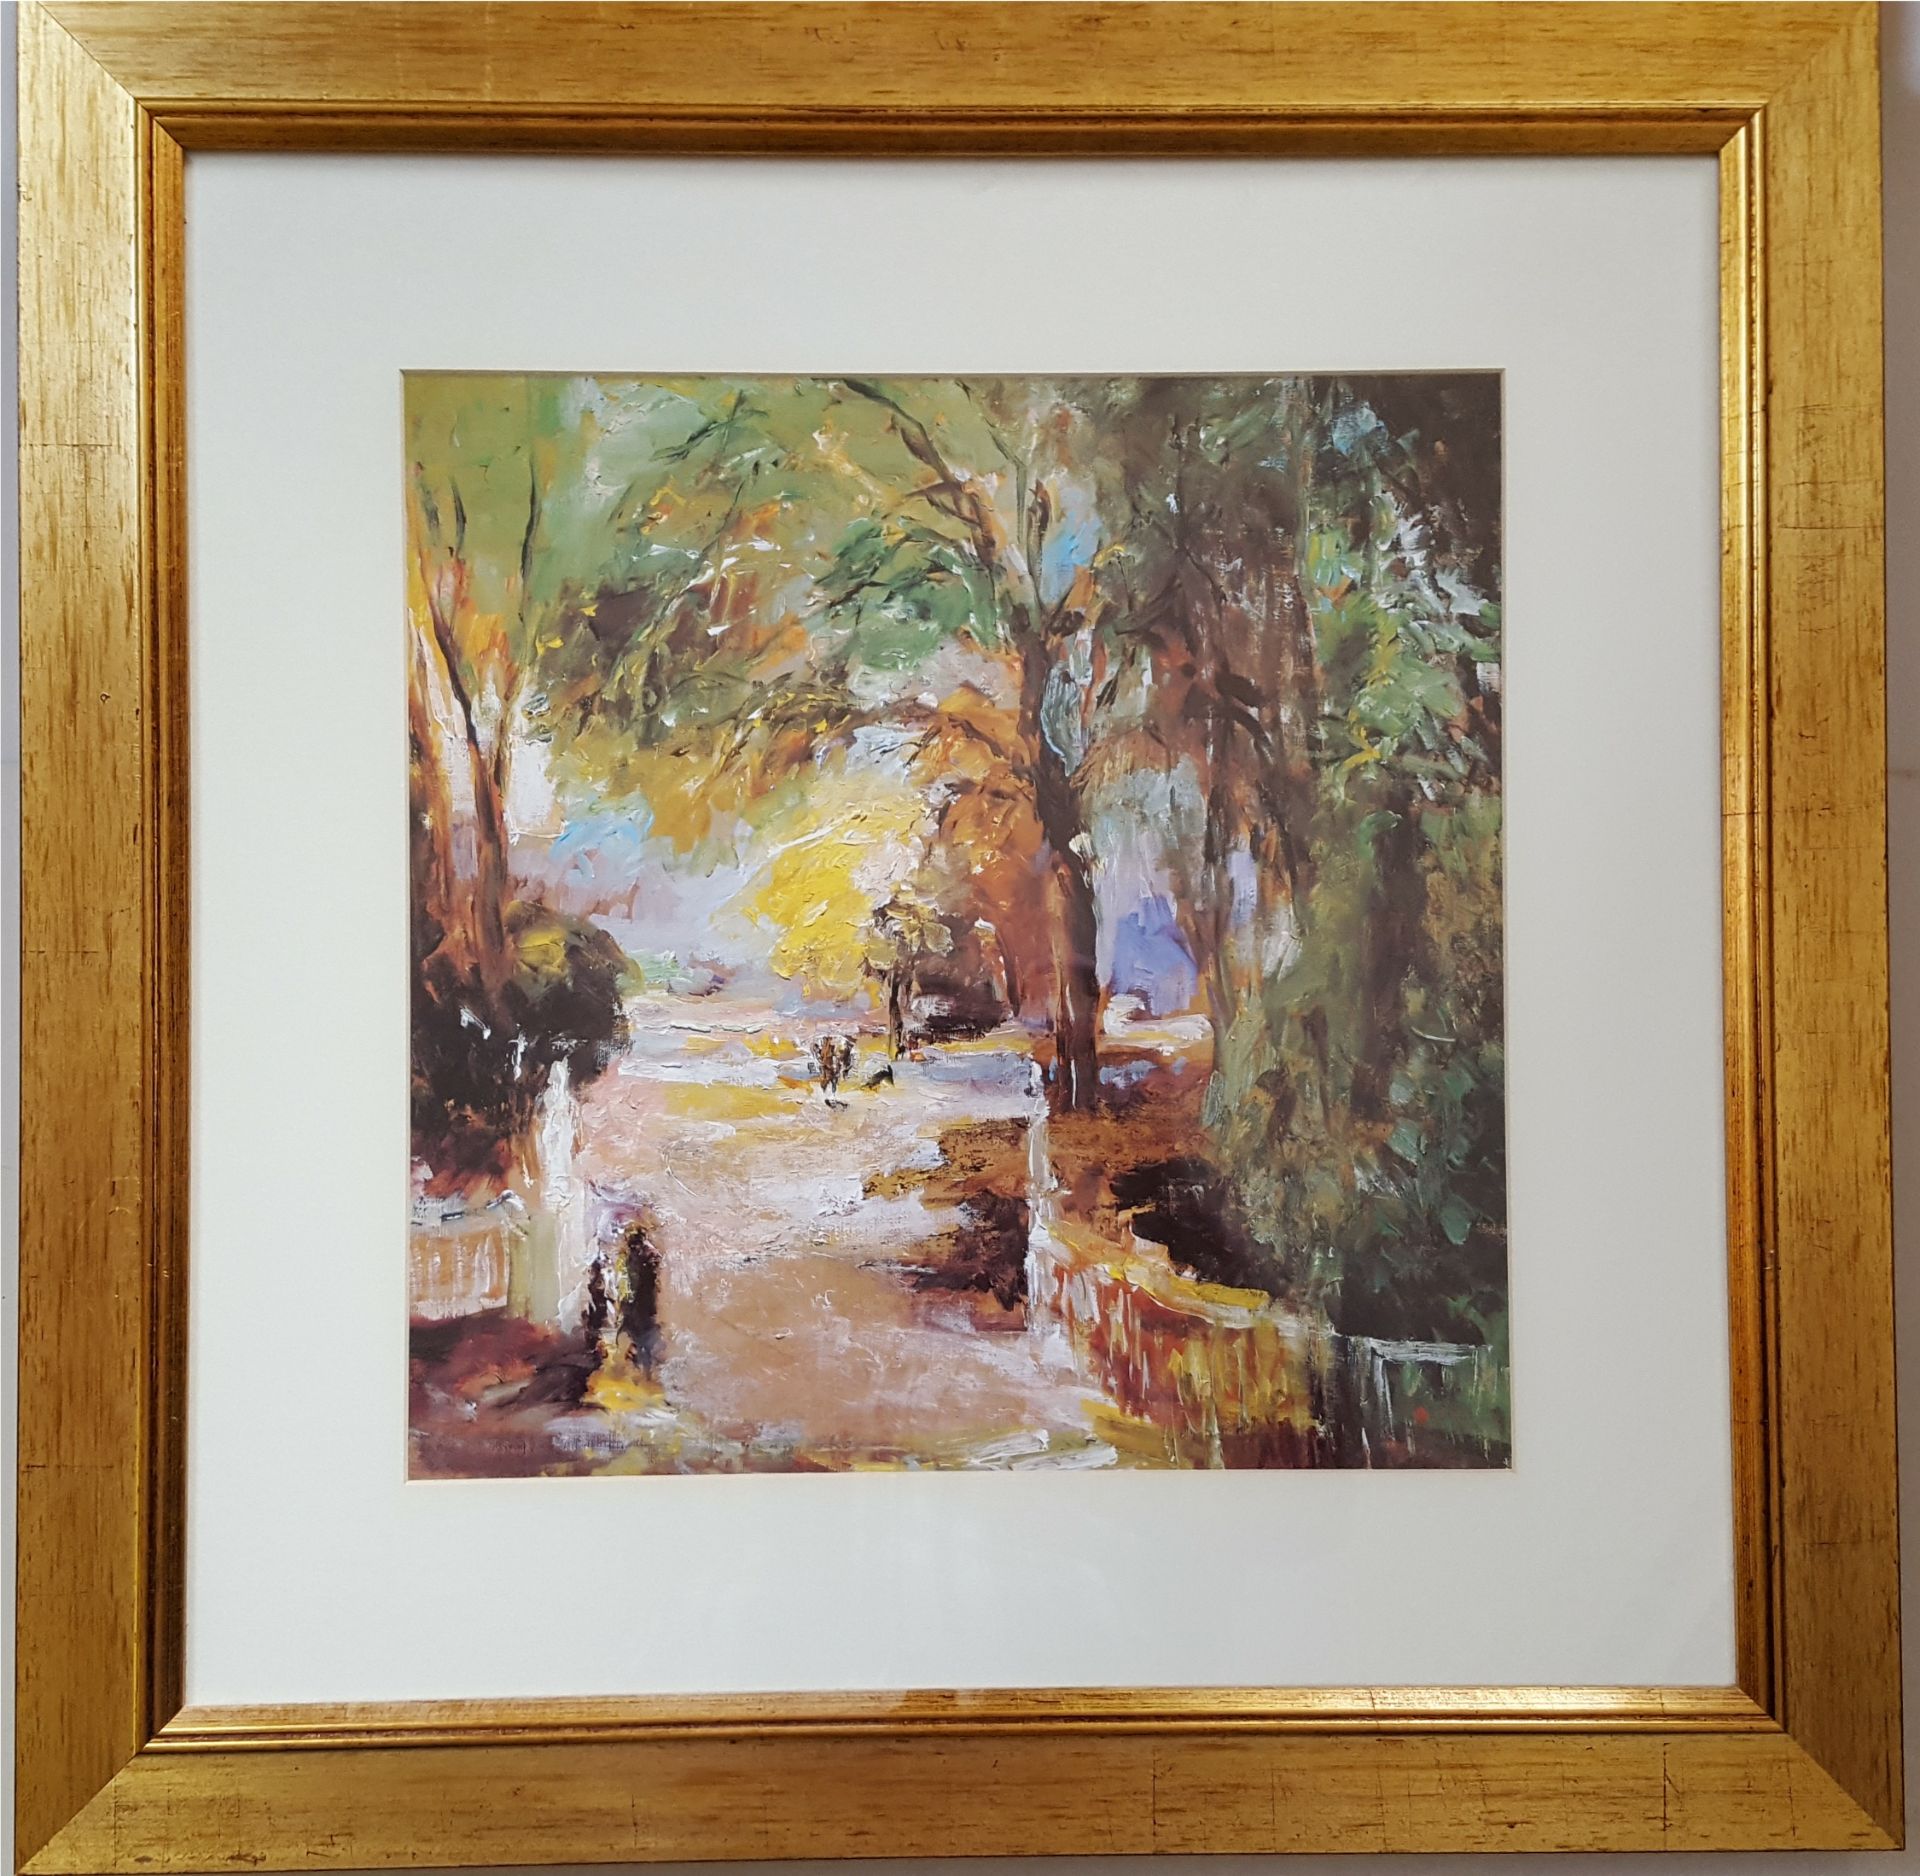 2 x Modern Prints in Gilt Coloured Frames Printed Signature Lower Left NO RESERVE - Image 2 of 3